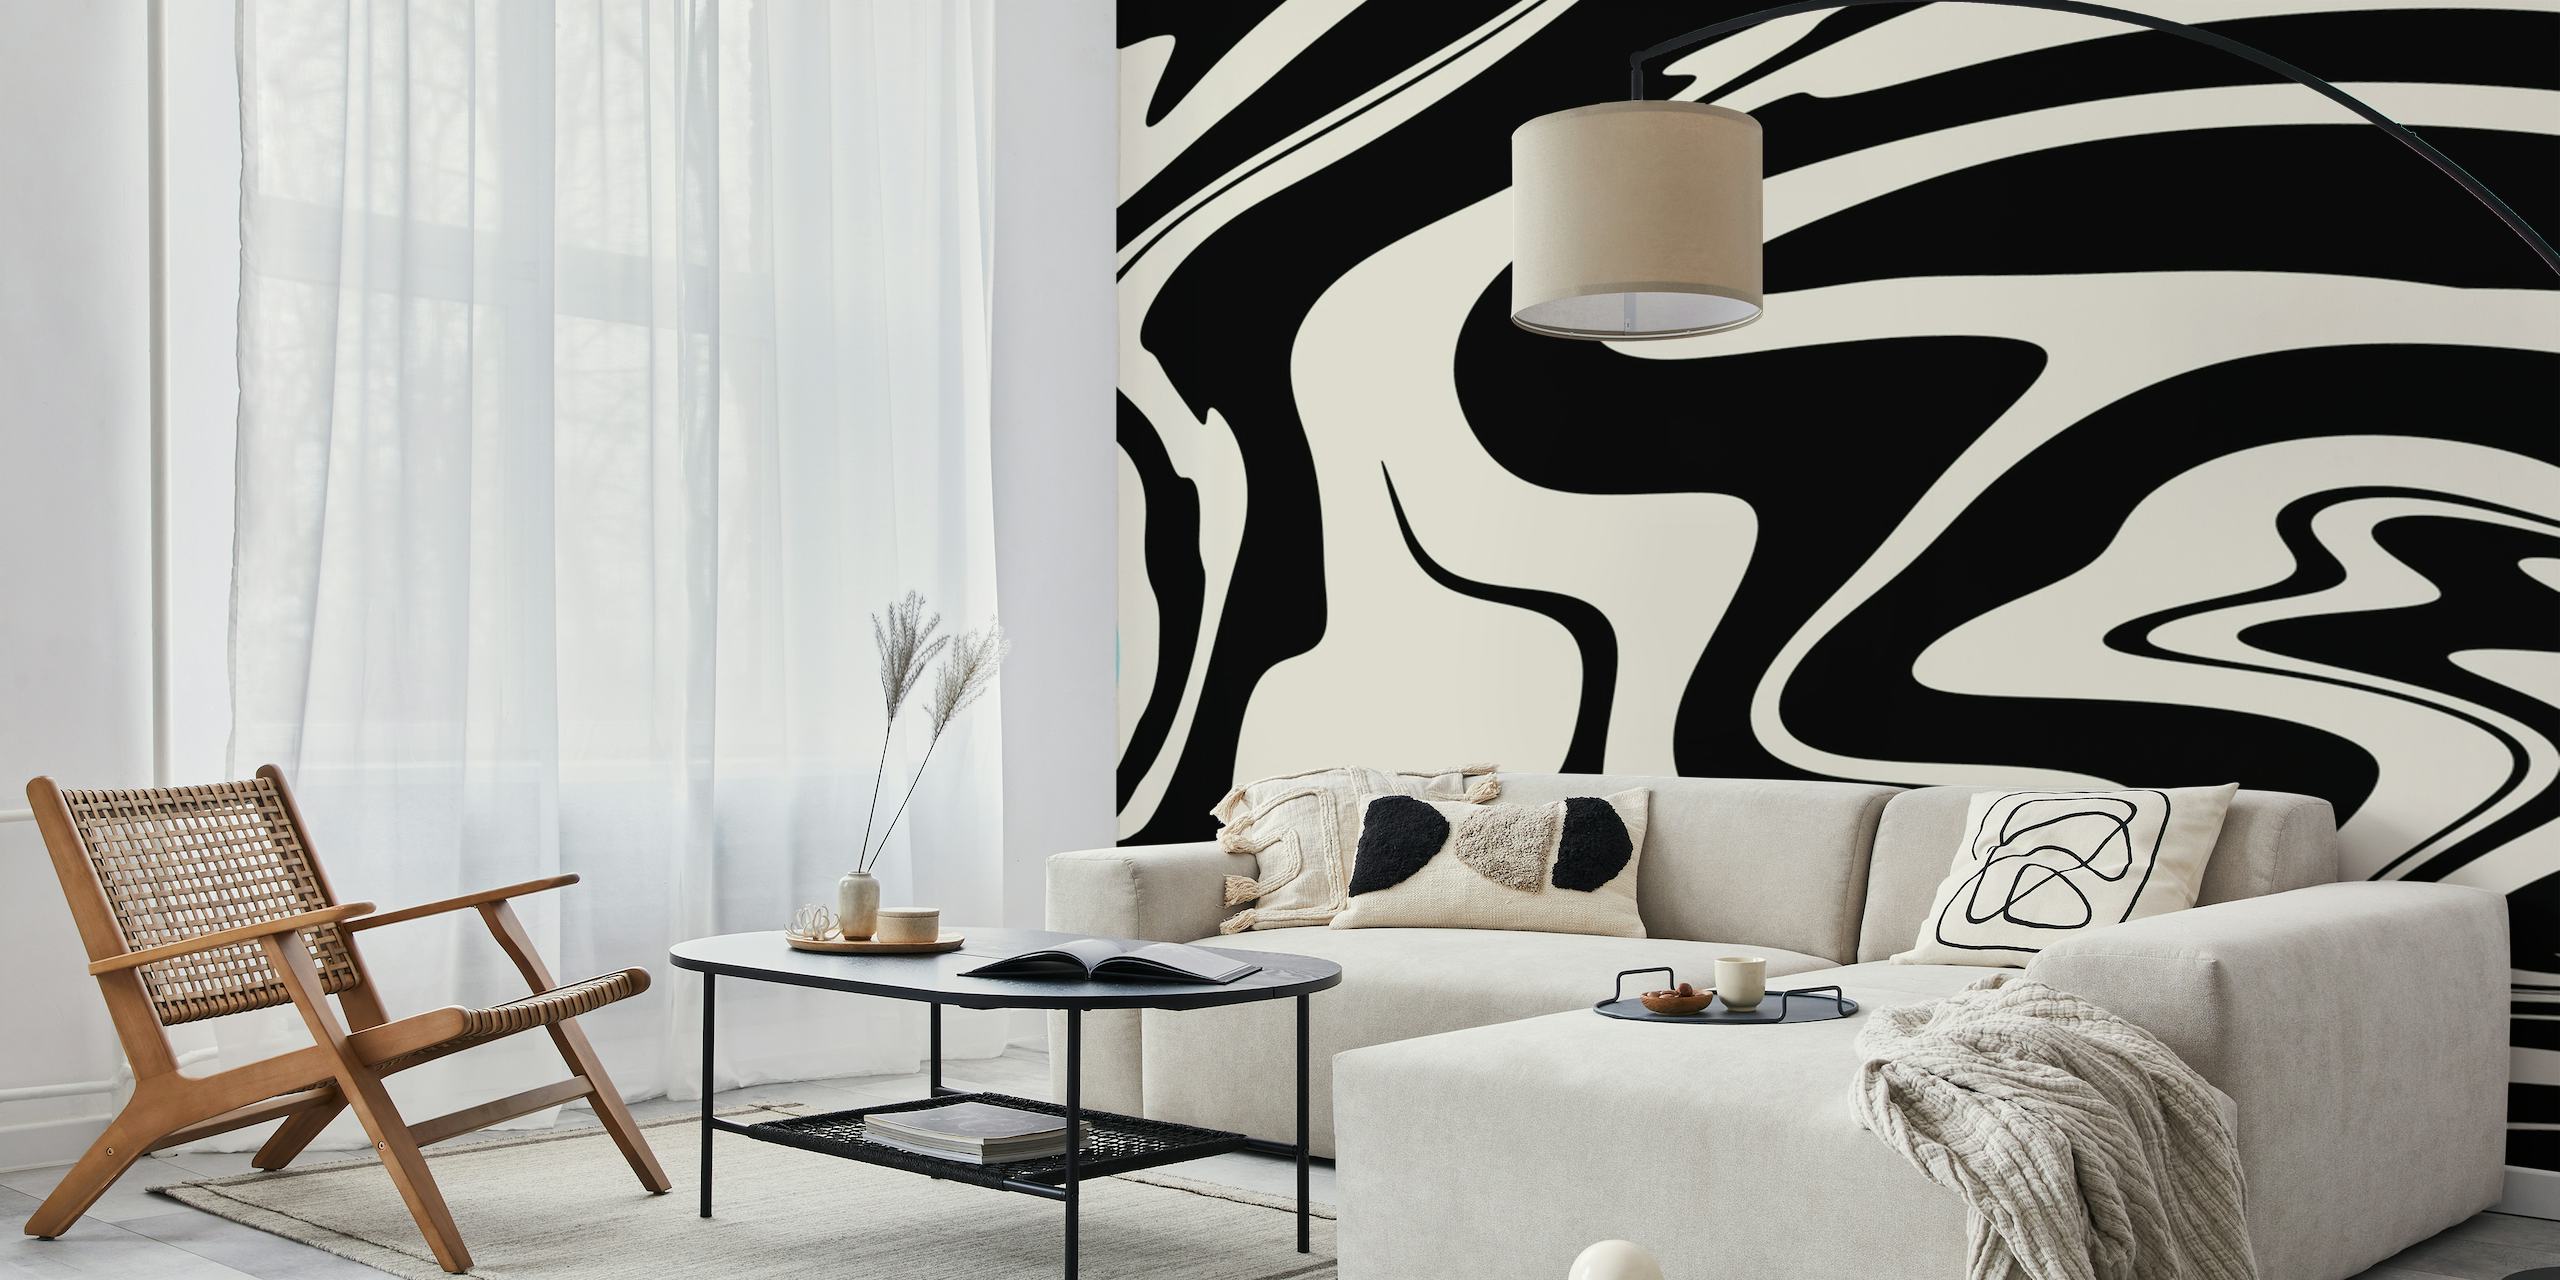 Black and white abstract swirling design reminiscent of retro glam style for wall mural.